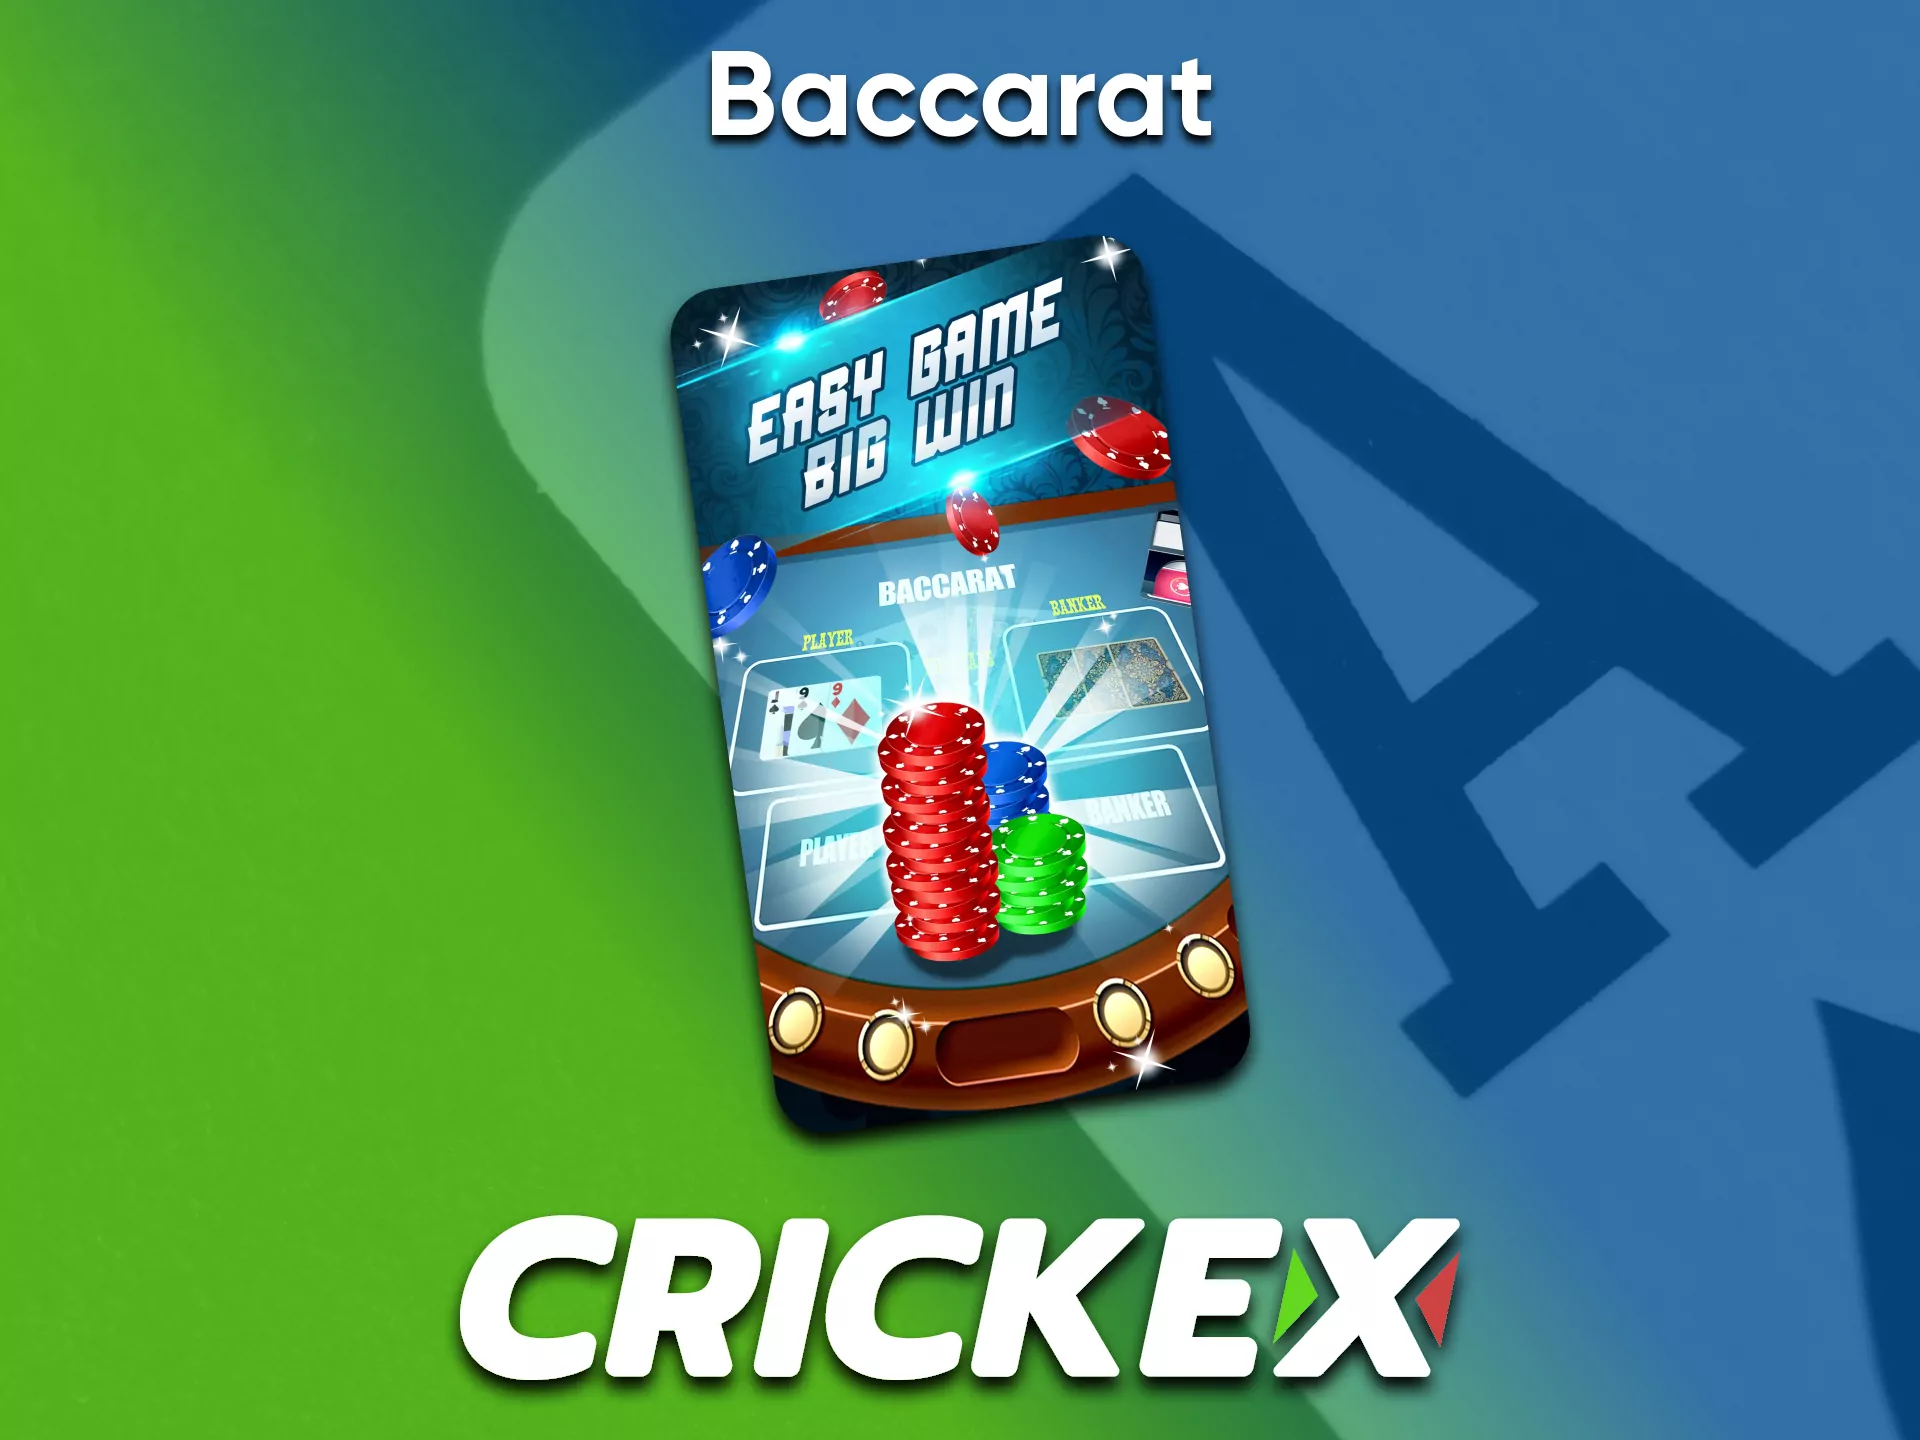 Baccarat is one of the many games at Crickex casino.